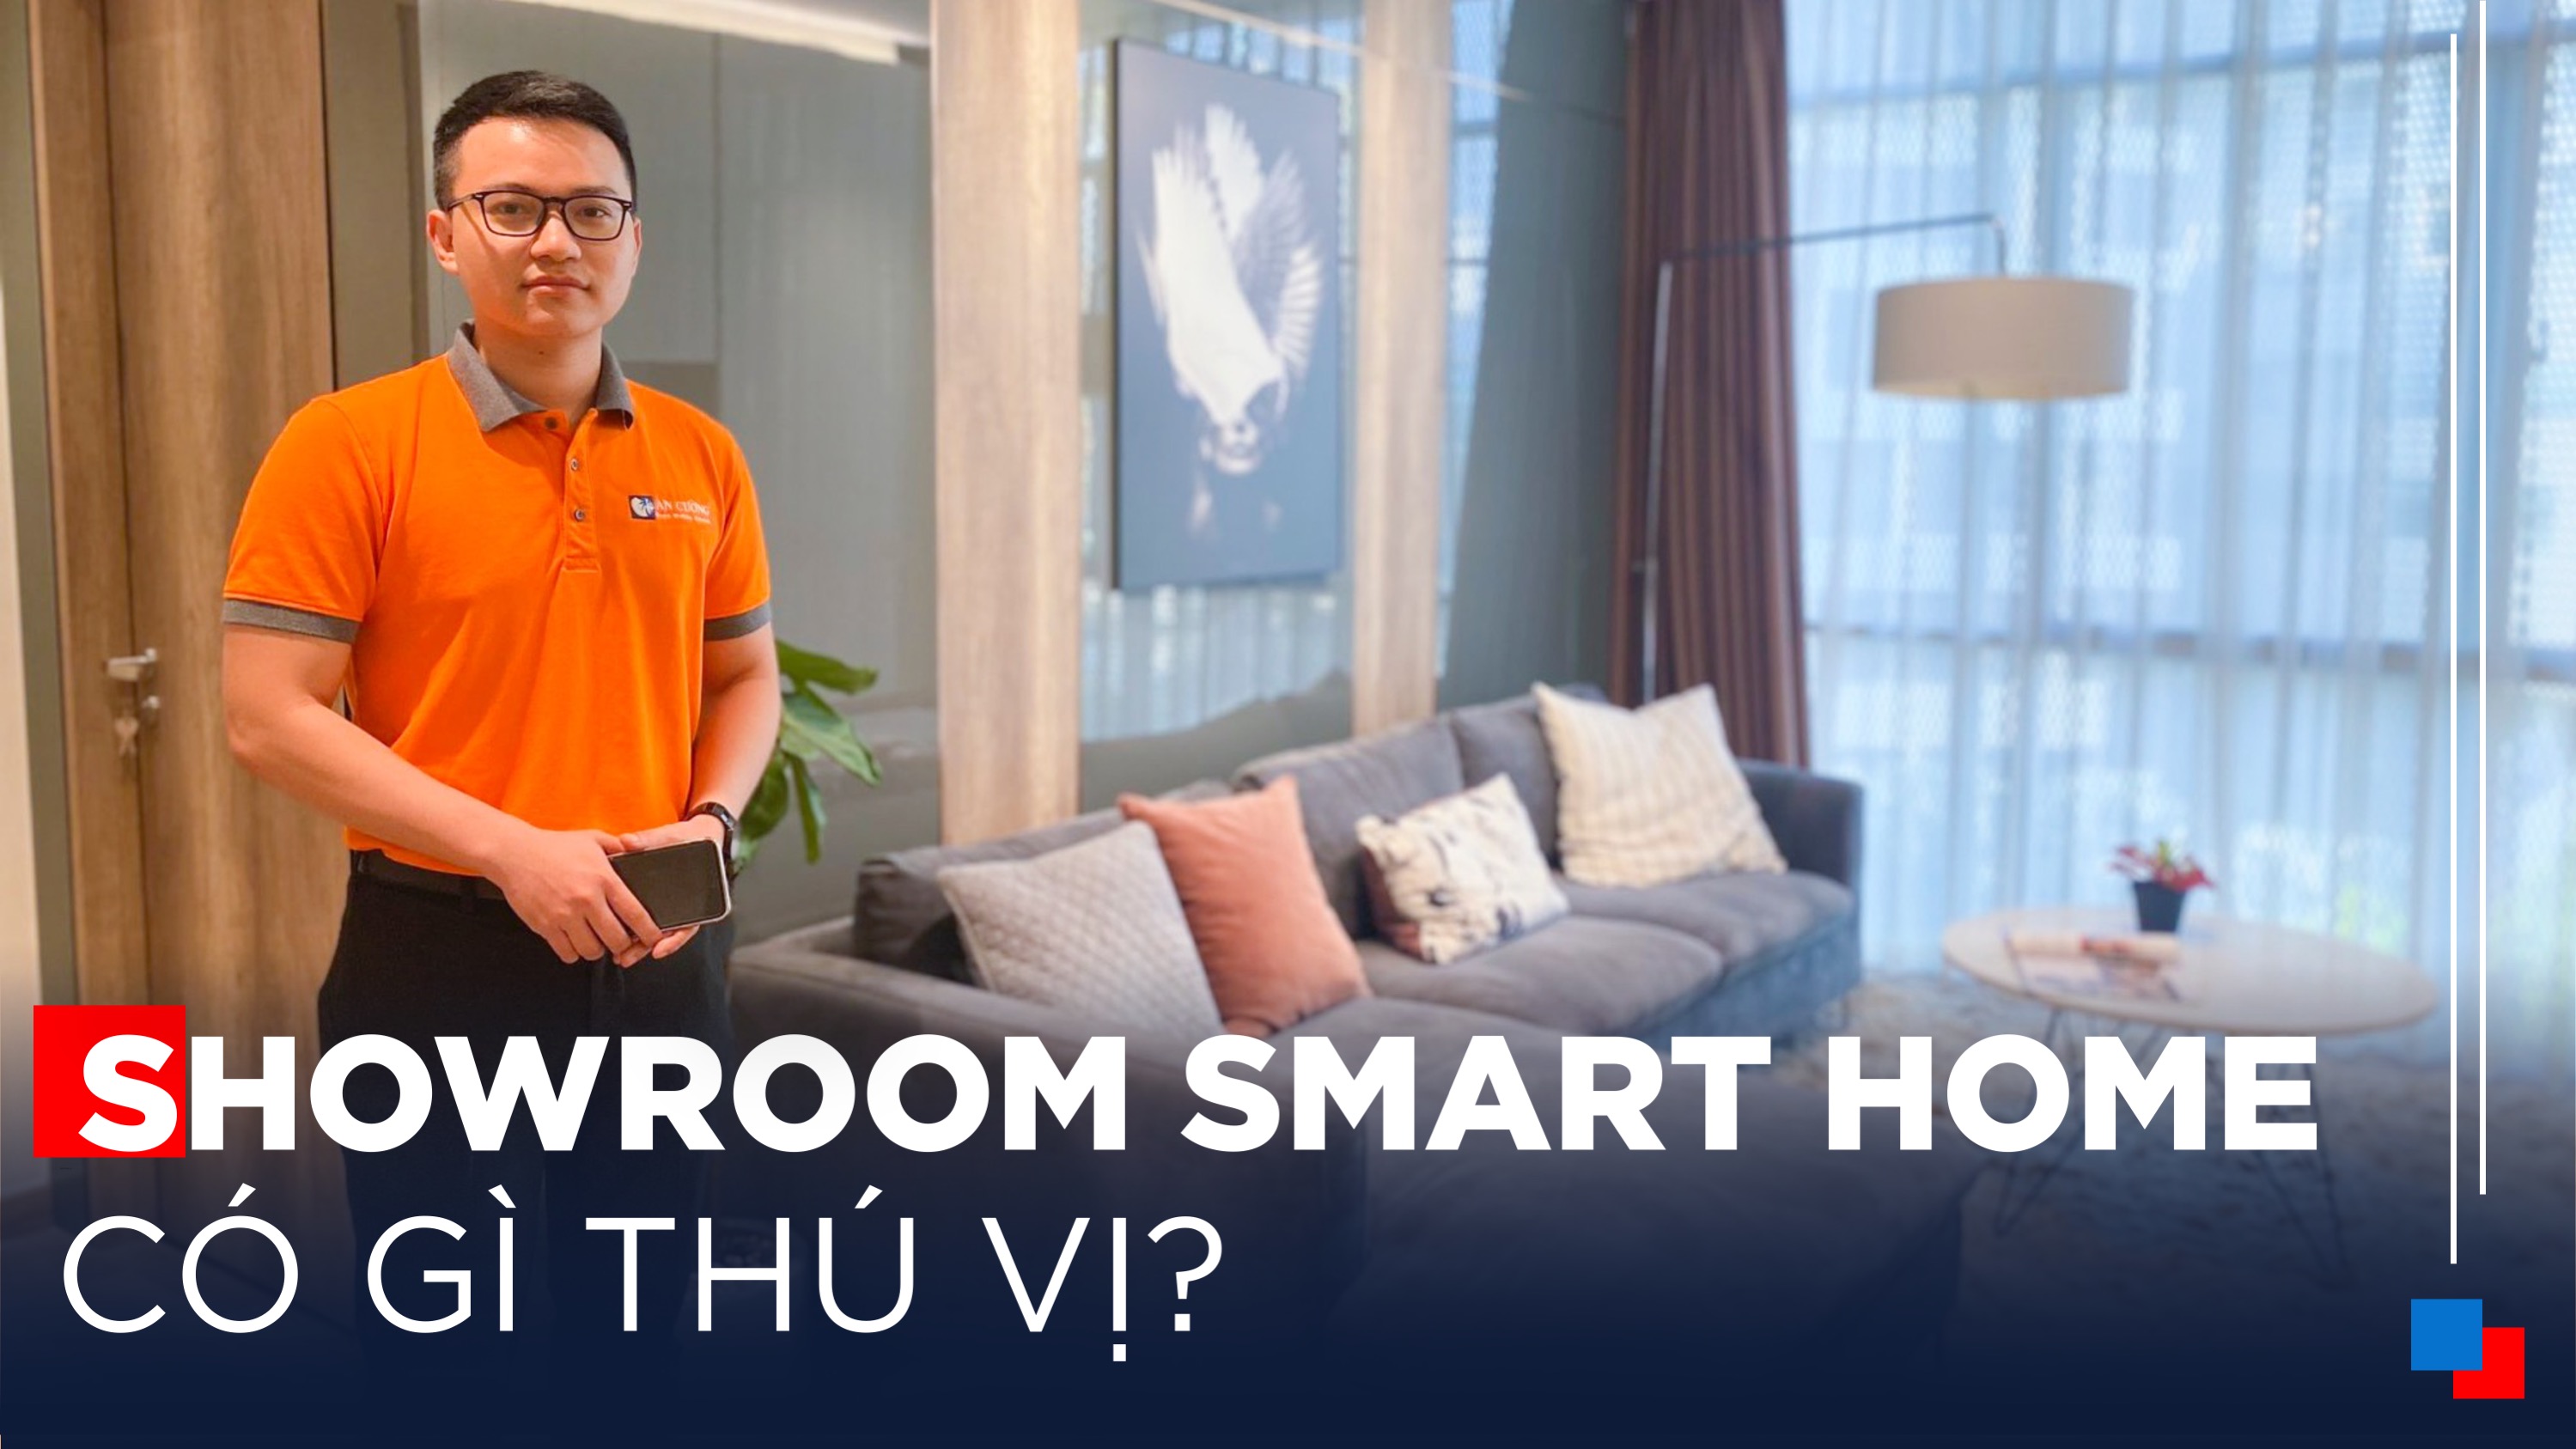 What's interesting about An Cuong's Smart Home Showroom?